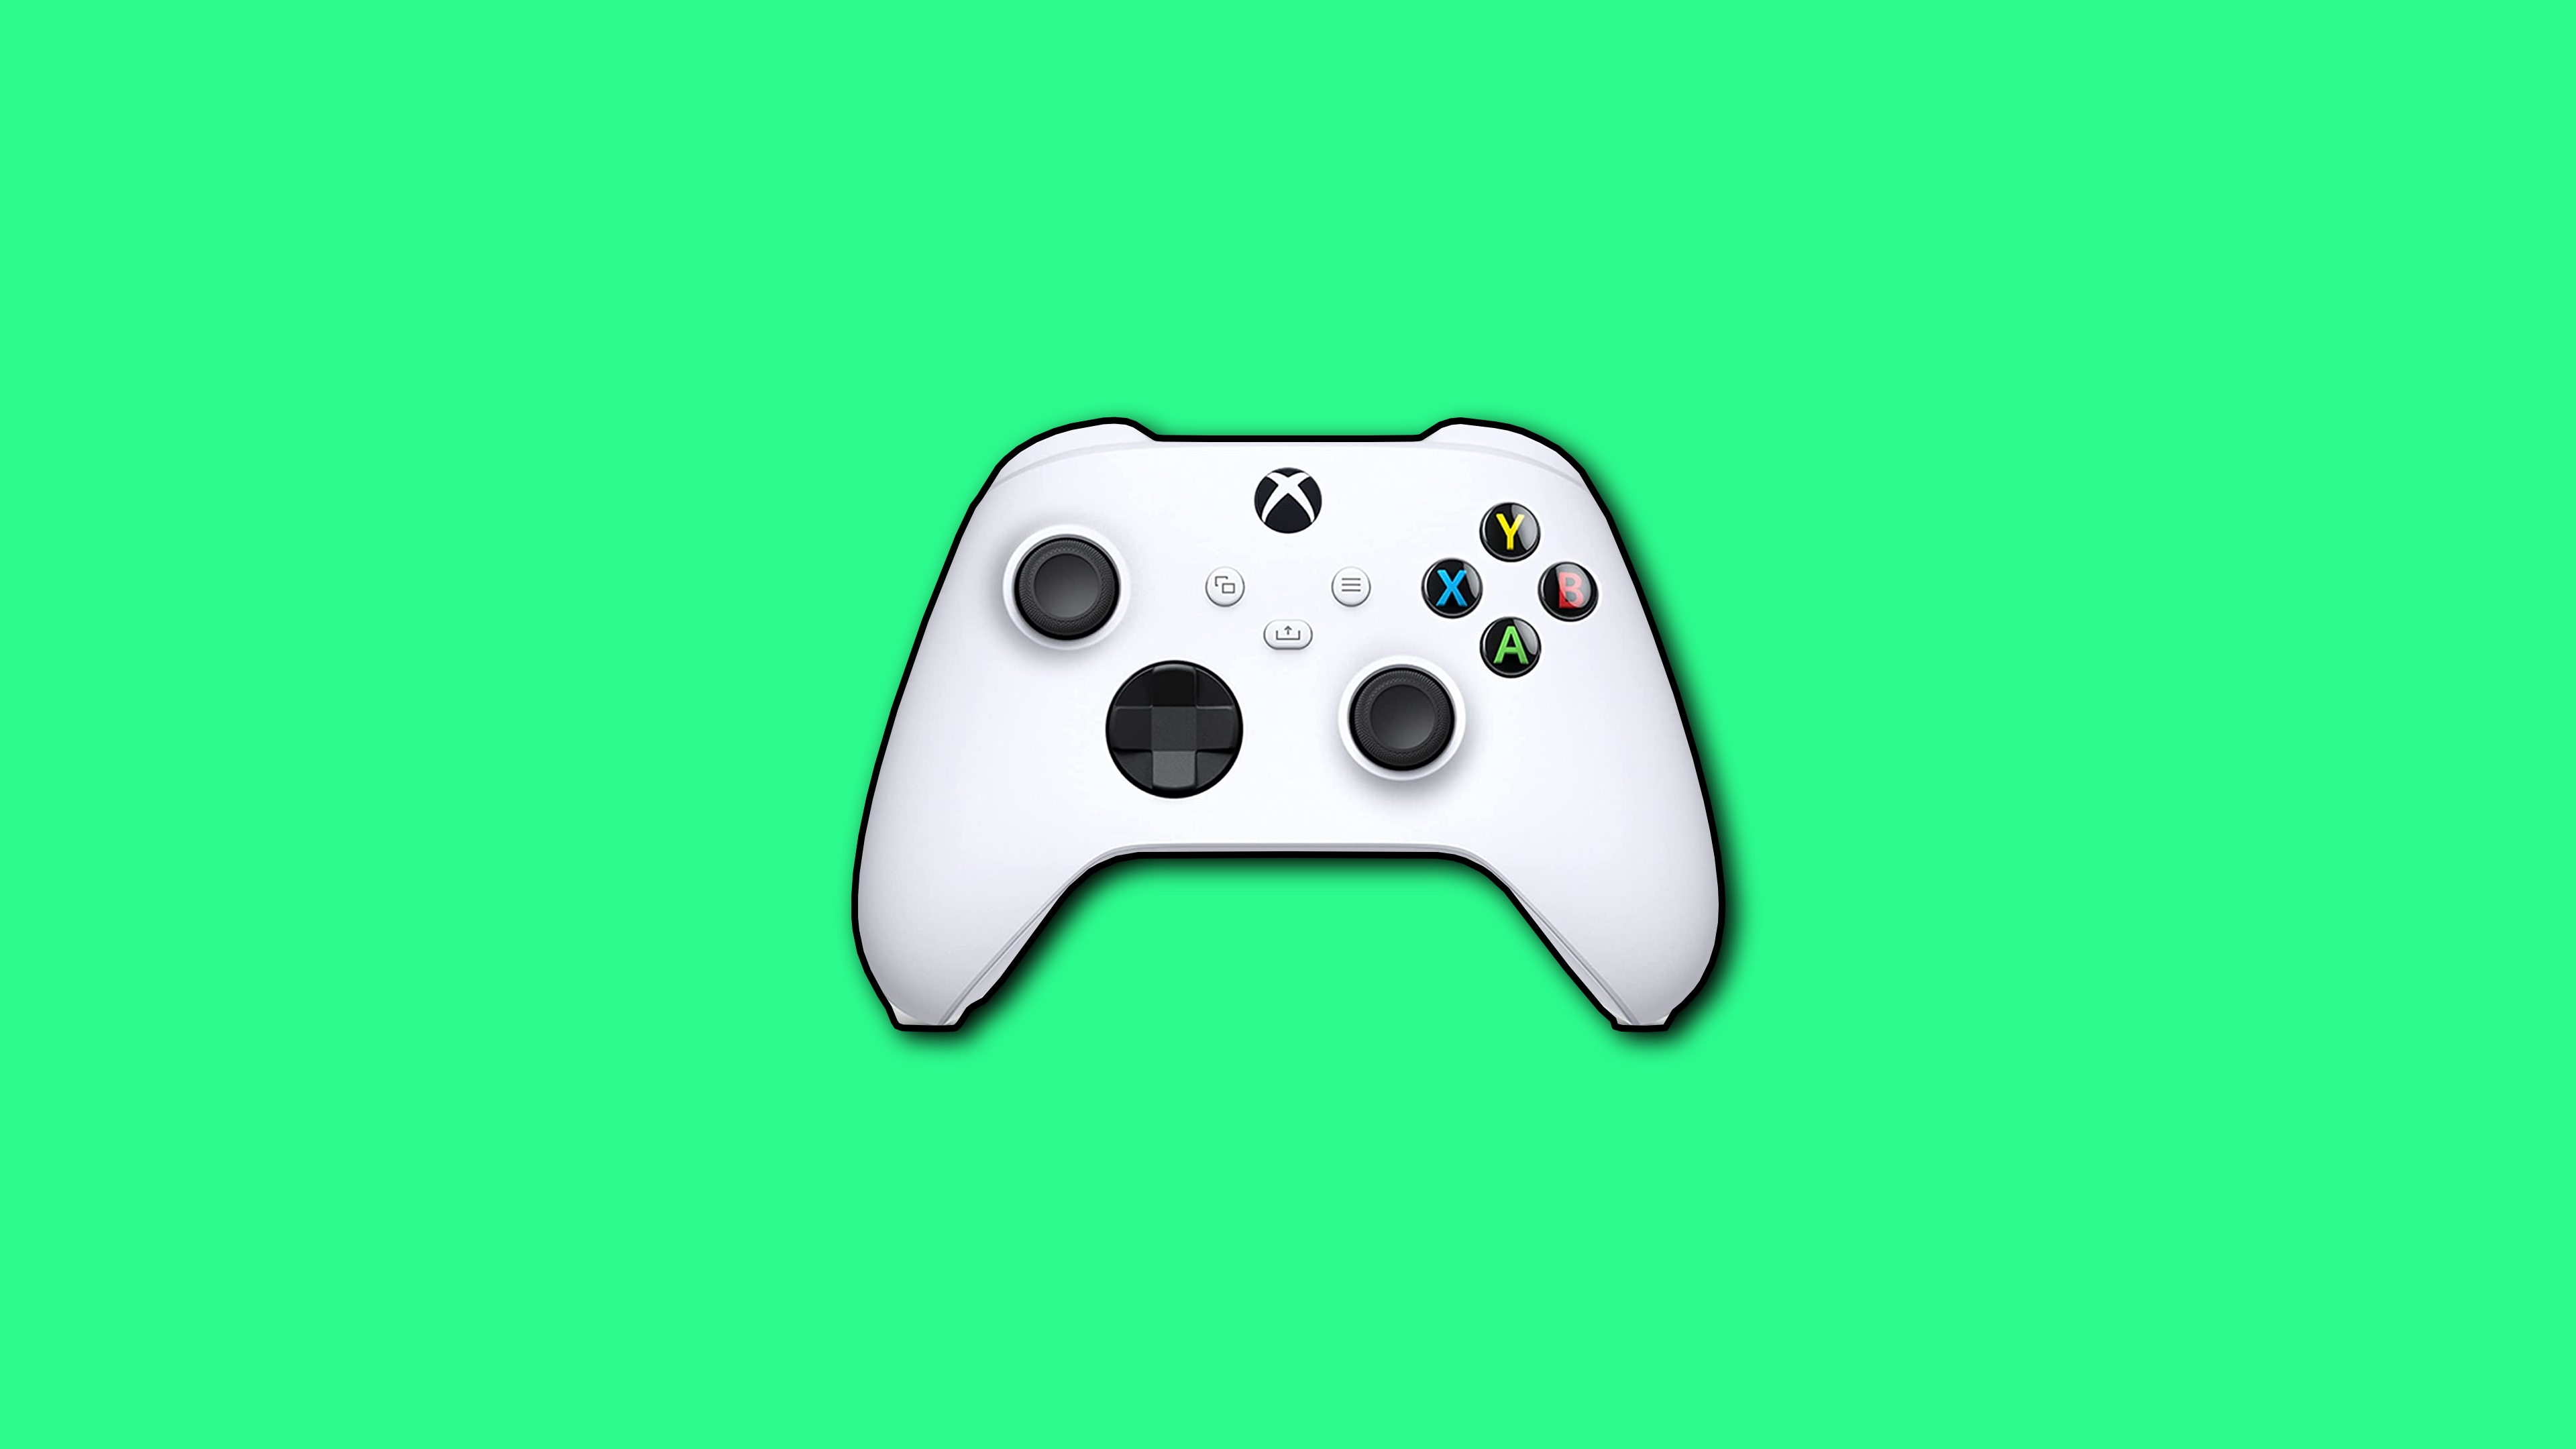 Microsoft says it won’t bring Xbox Cloud Gaming to iPhone under Apple’s new rules